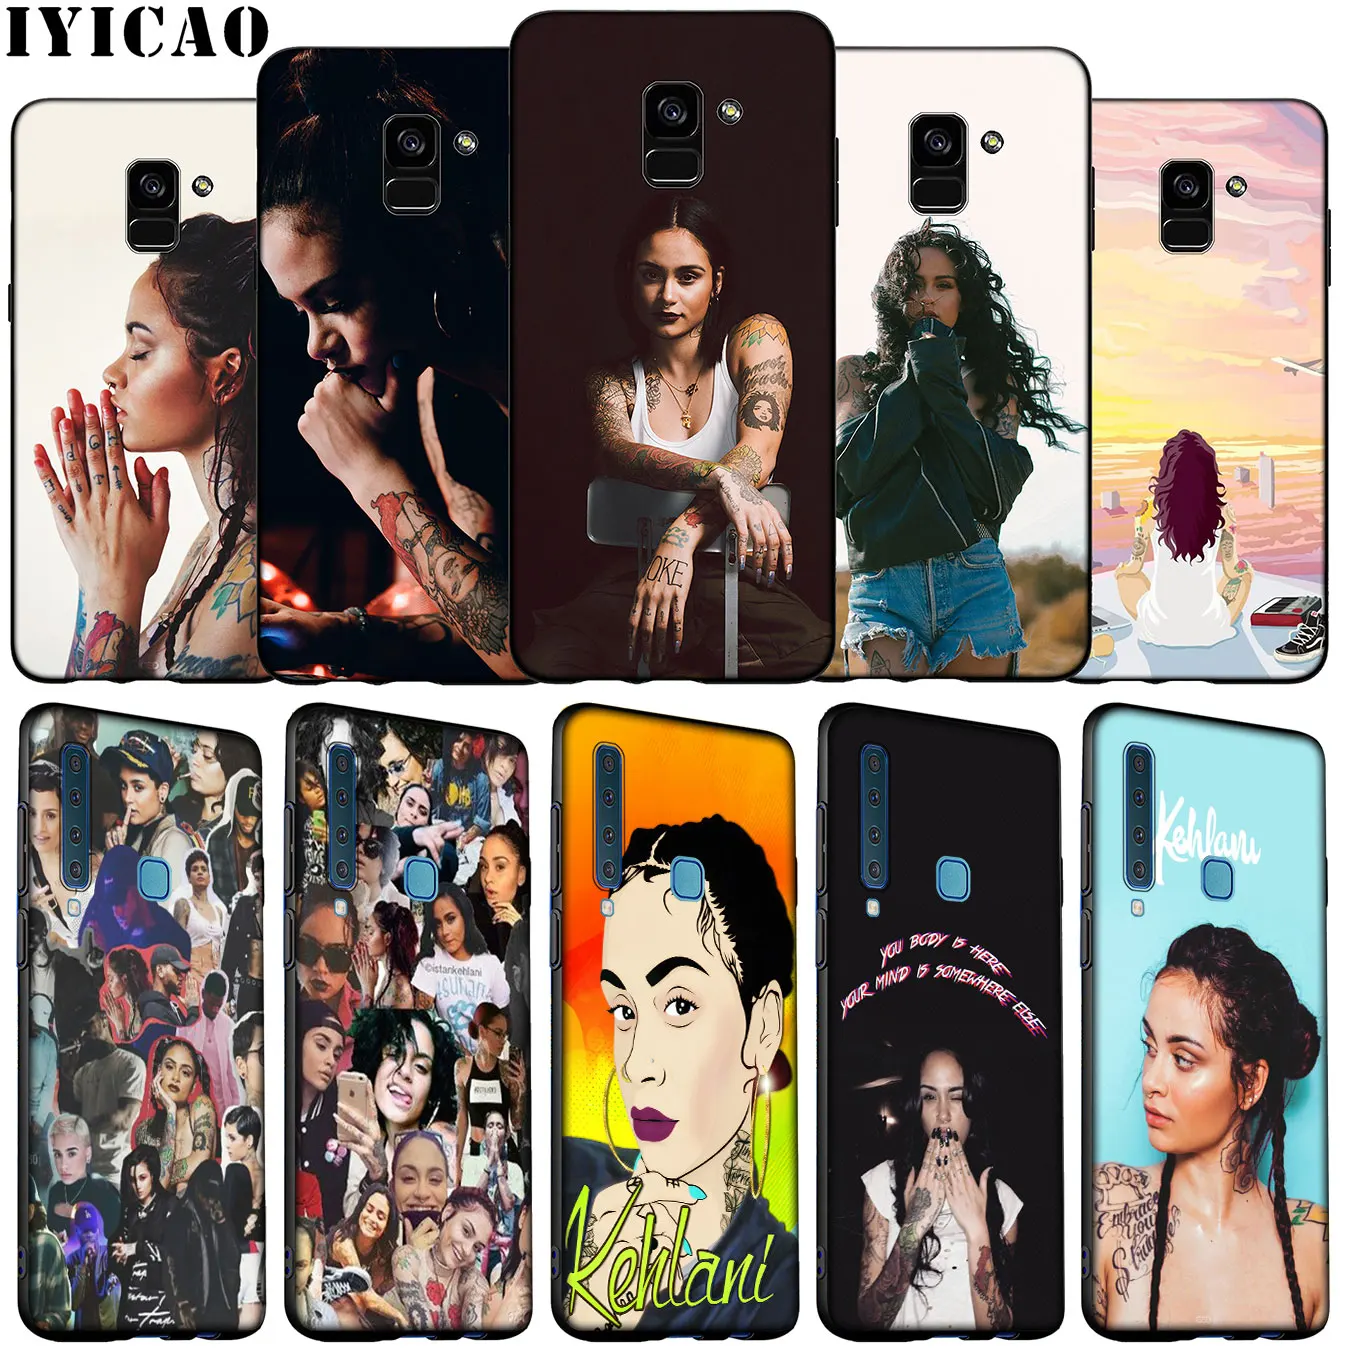 Kehlani pop Soft Silicone Phone Case for Samsung Galaxy A51 A71 A81 A91 A41 A21 A11 A01 A2 Core J8 J7 J6 J4 Plus Prime 2018 |